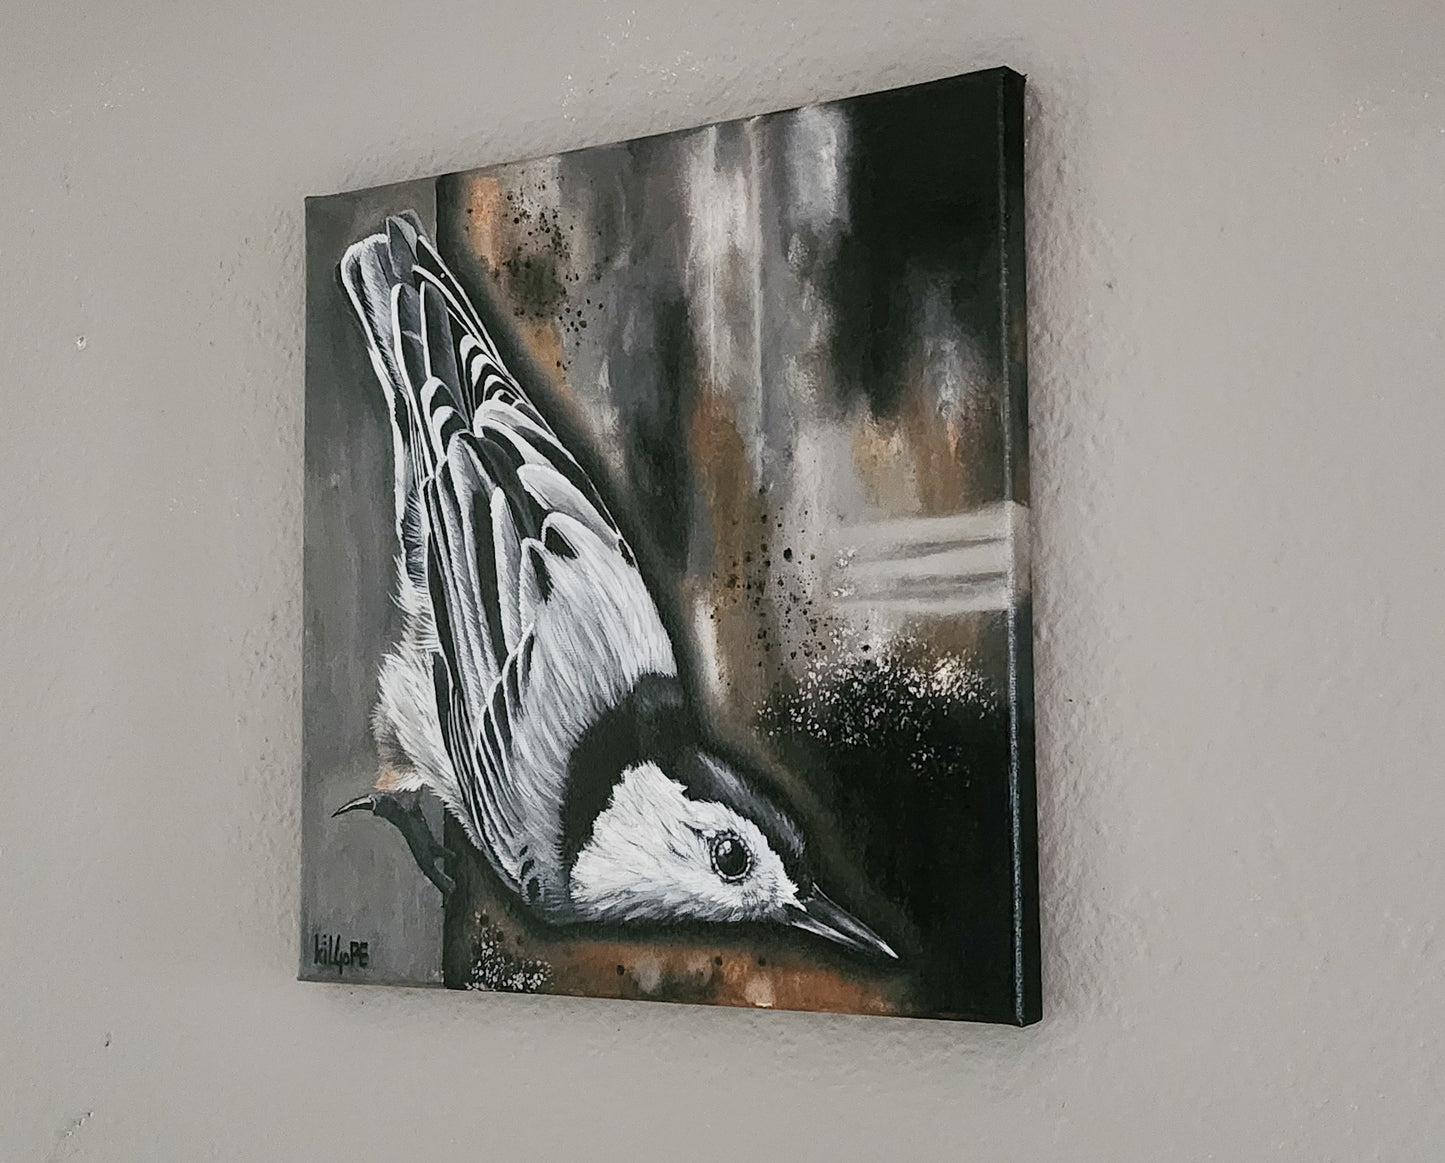 White Breasted Nuthatch "Direction" - Original Oil Painting - By Kilgore, Original 12" x 12" Oil Painting on Stretched Canvas